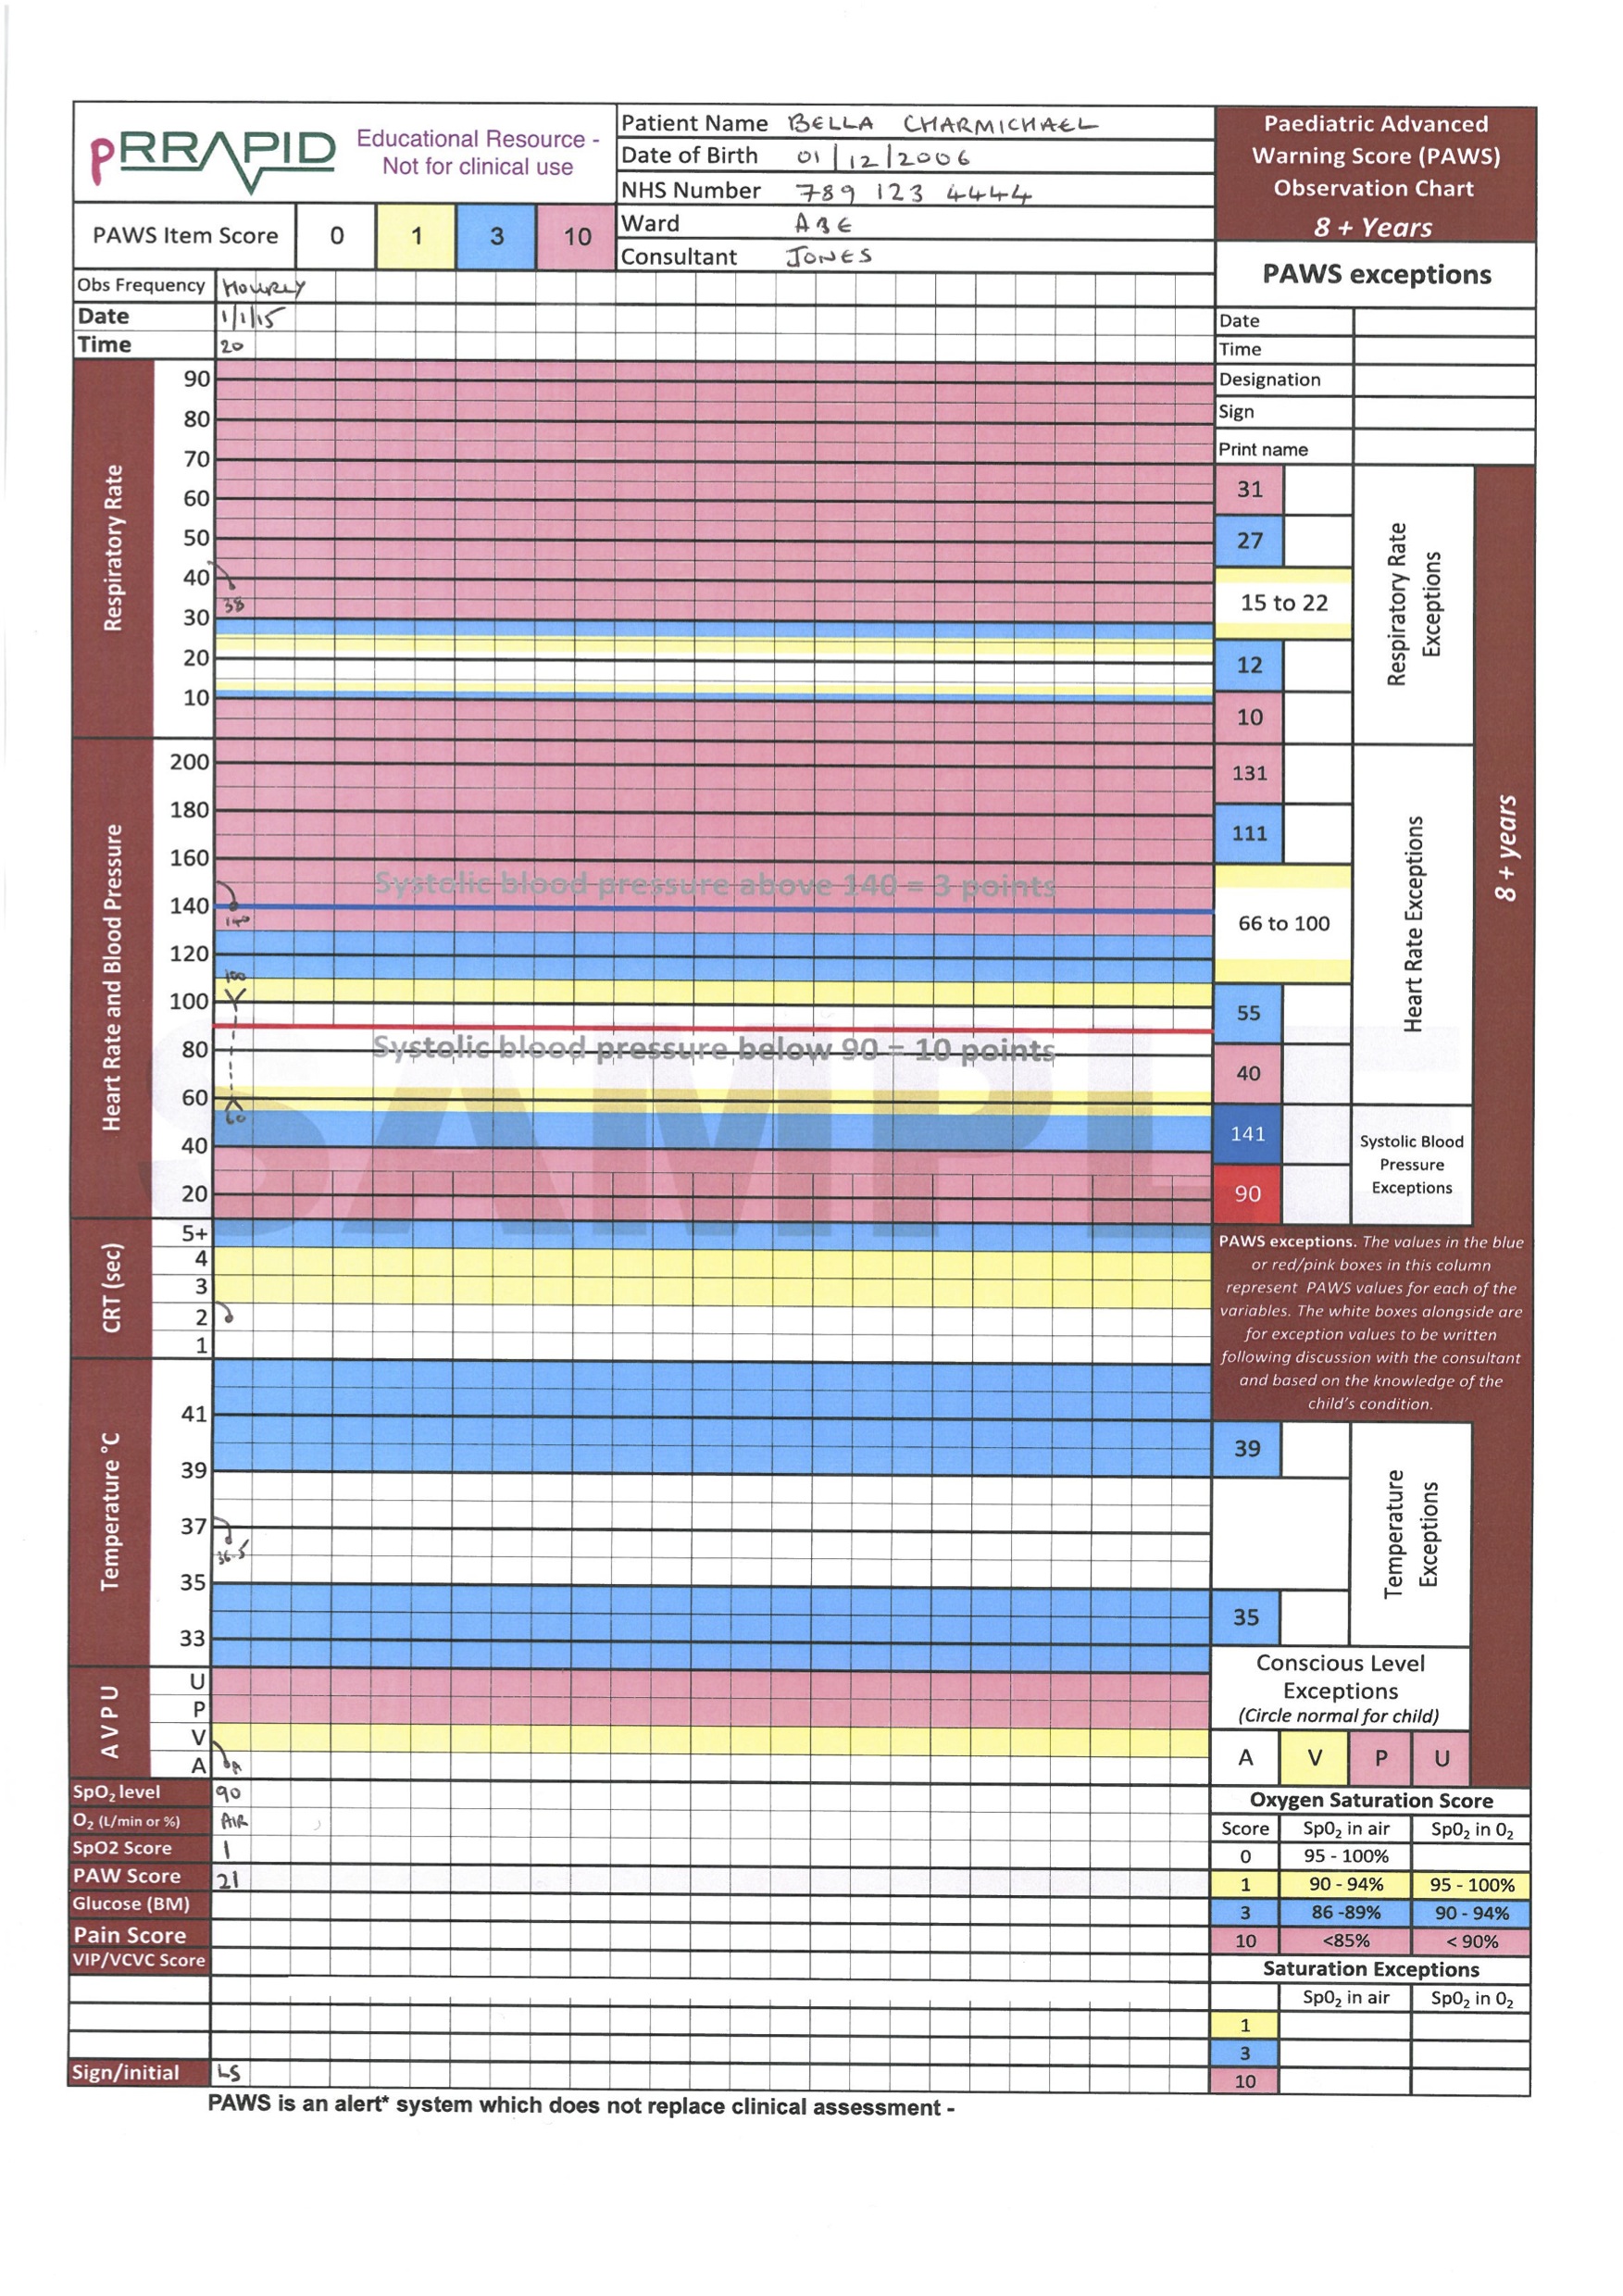 Paediatric Early Warning Score (EWS) chart with the patient